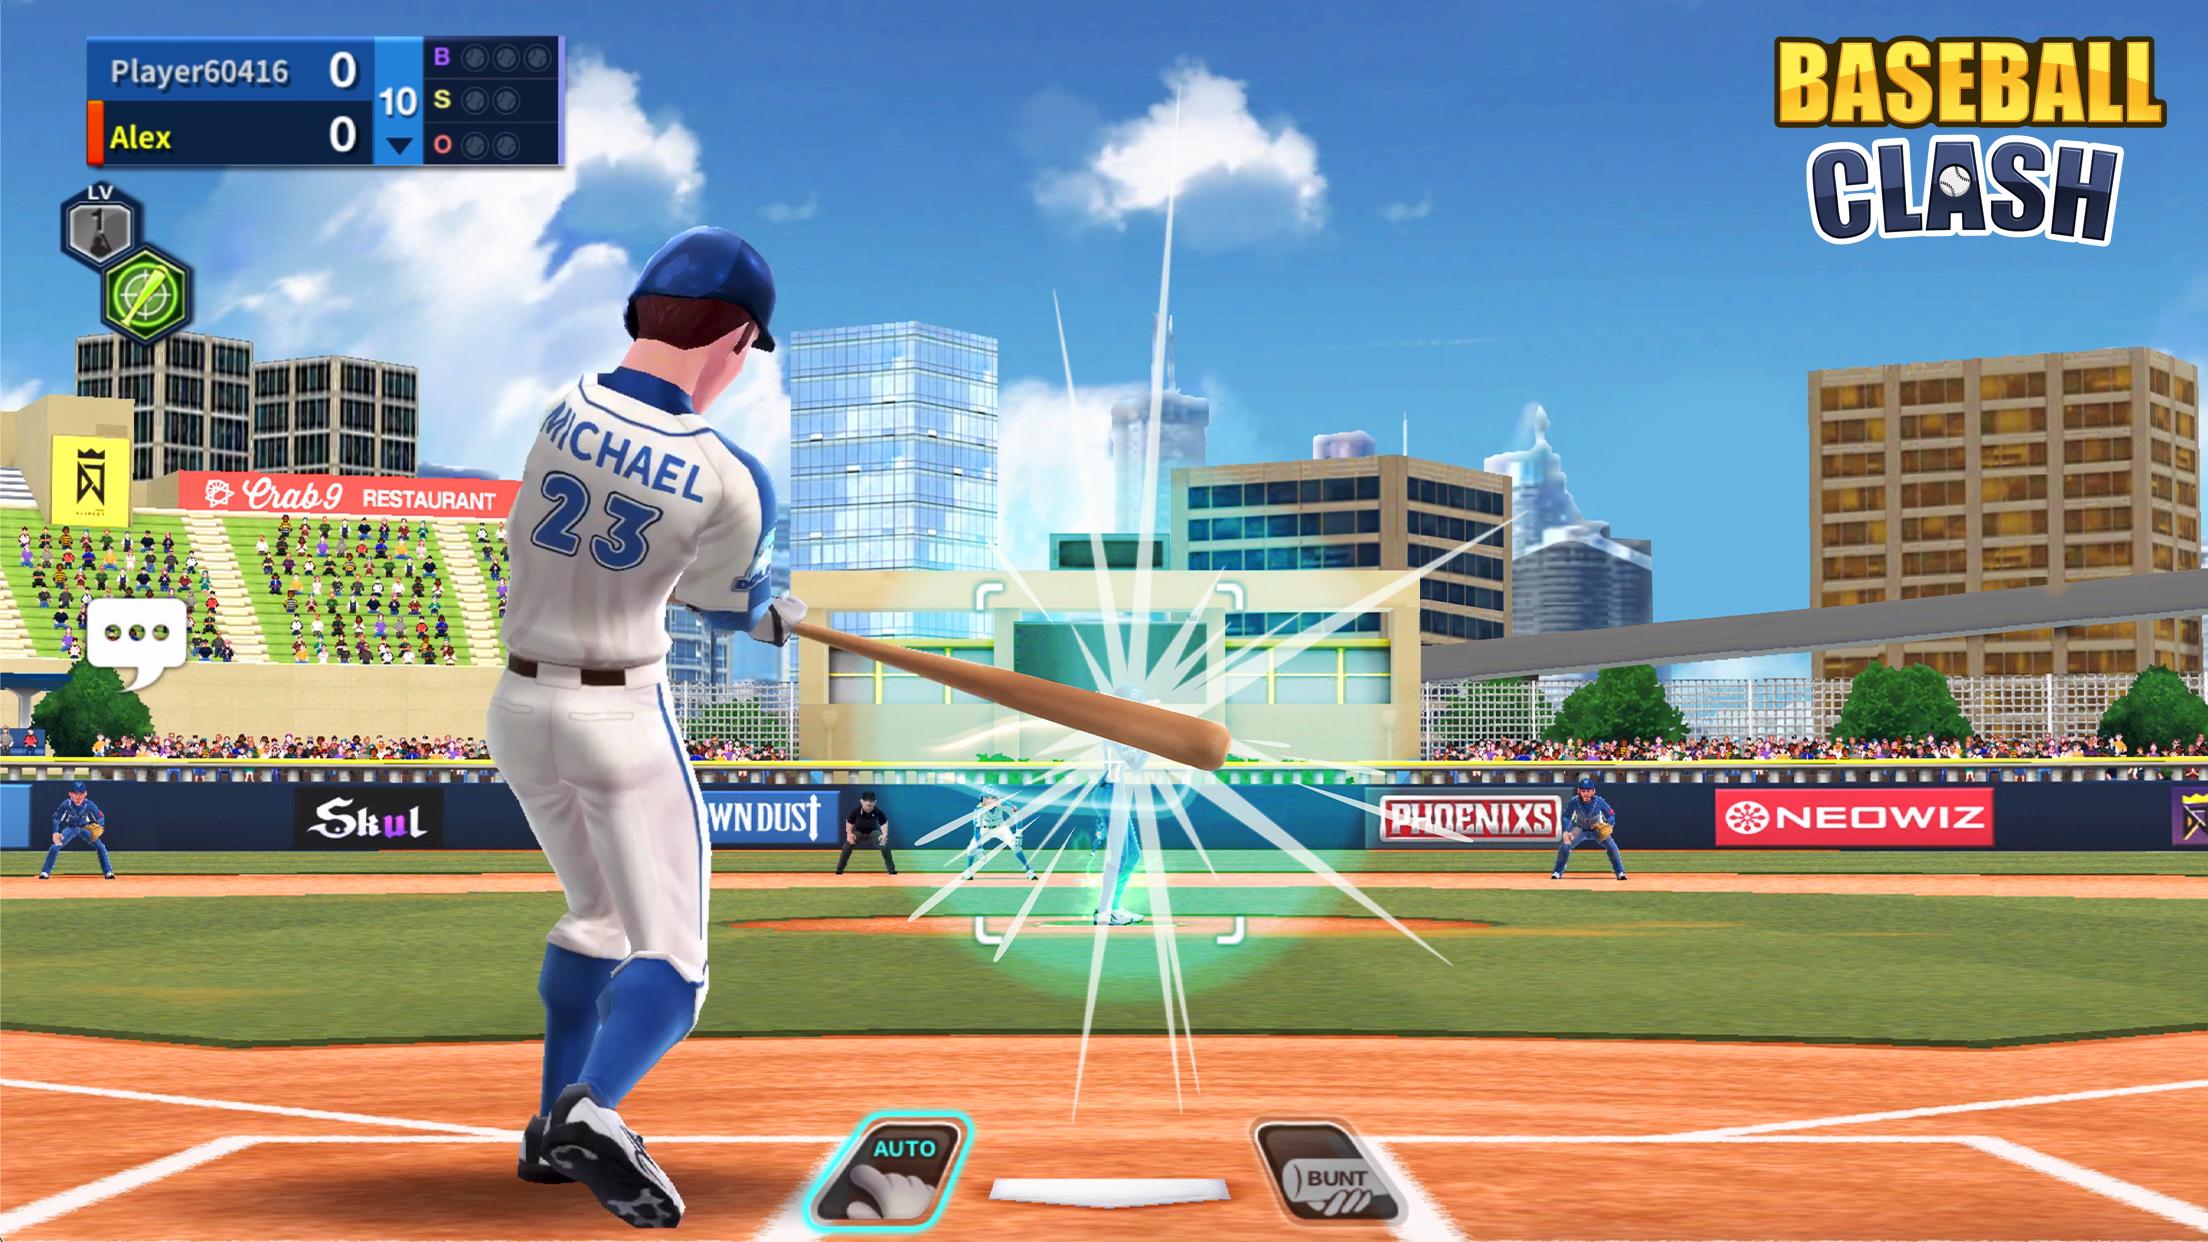 Quick игра. Real game time. Game time 32 игры. Baseball Clash character. Время игры 21